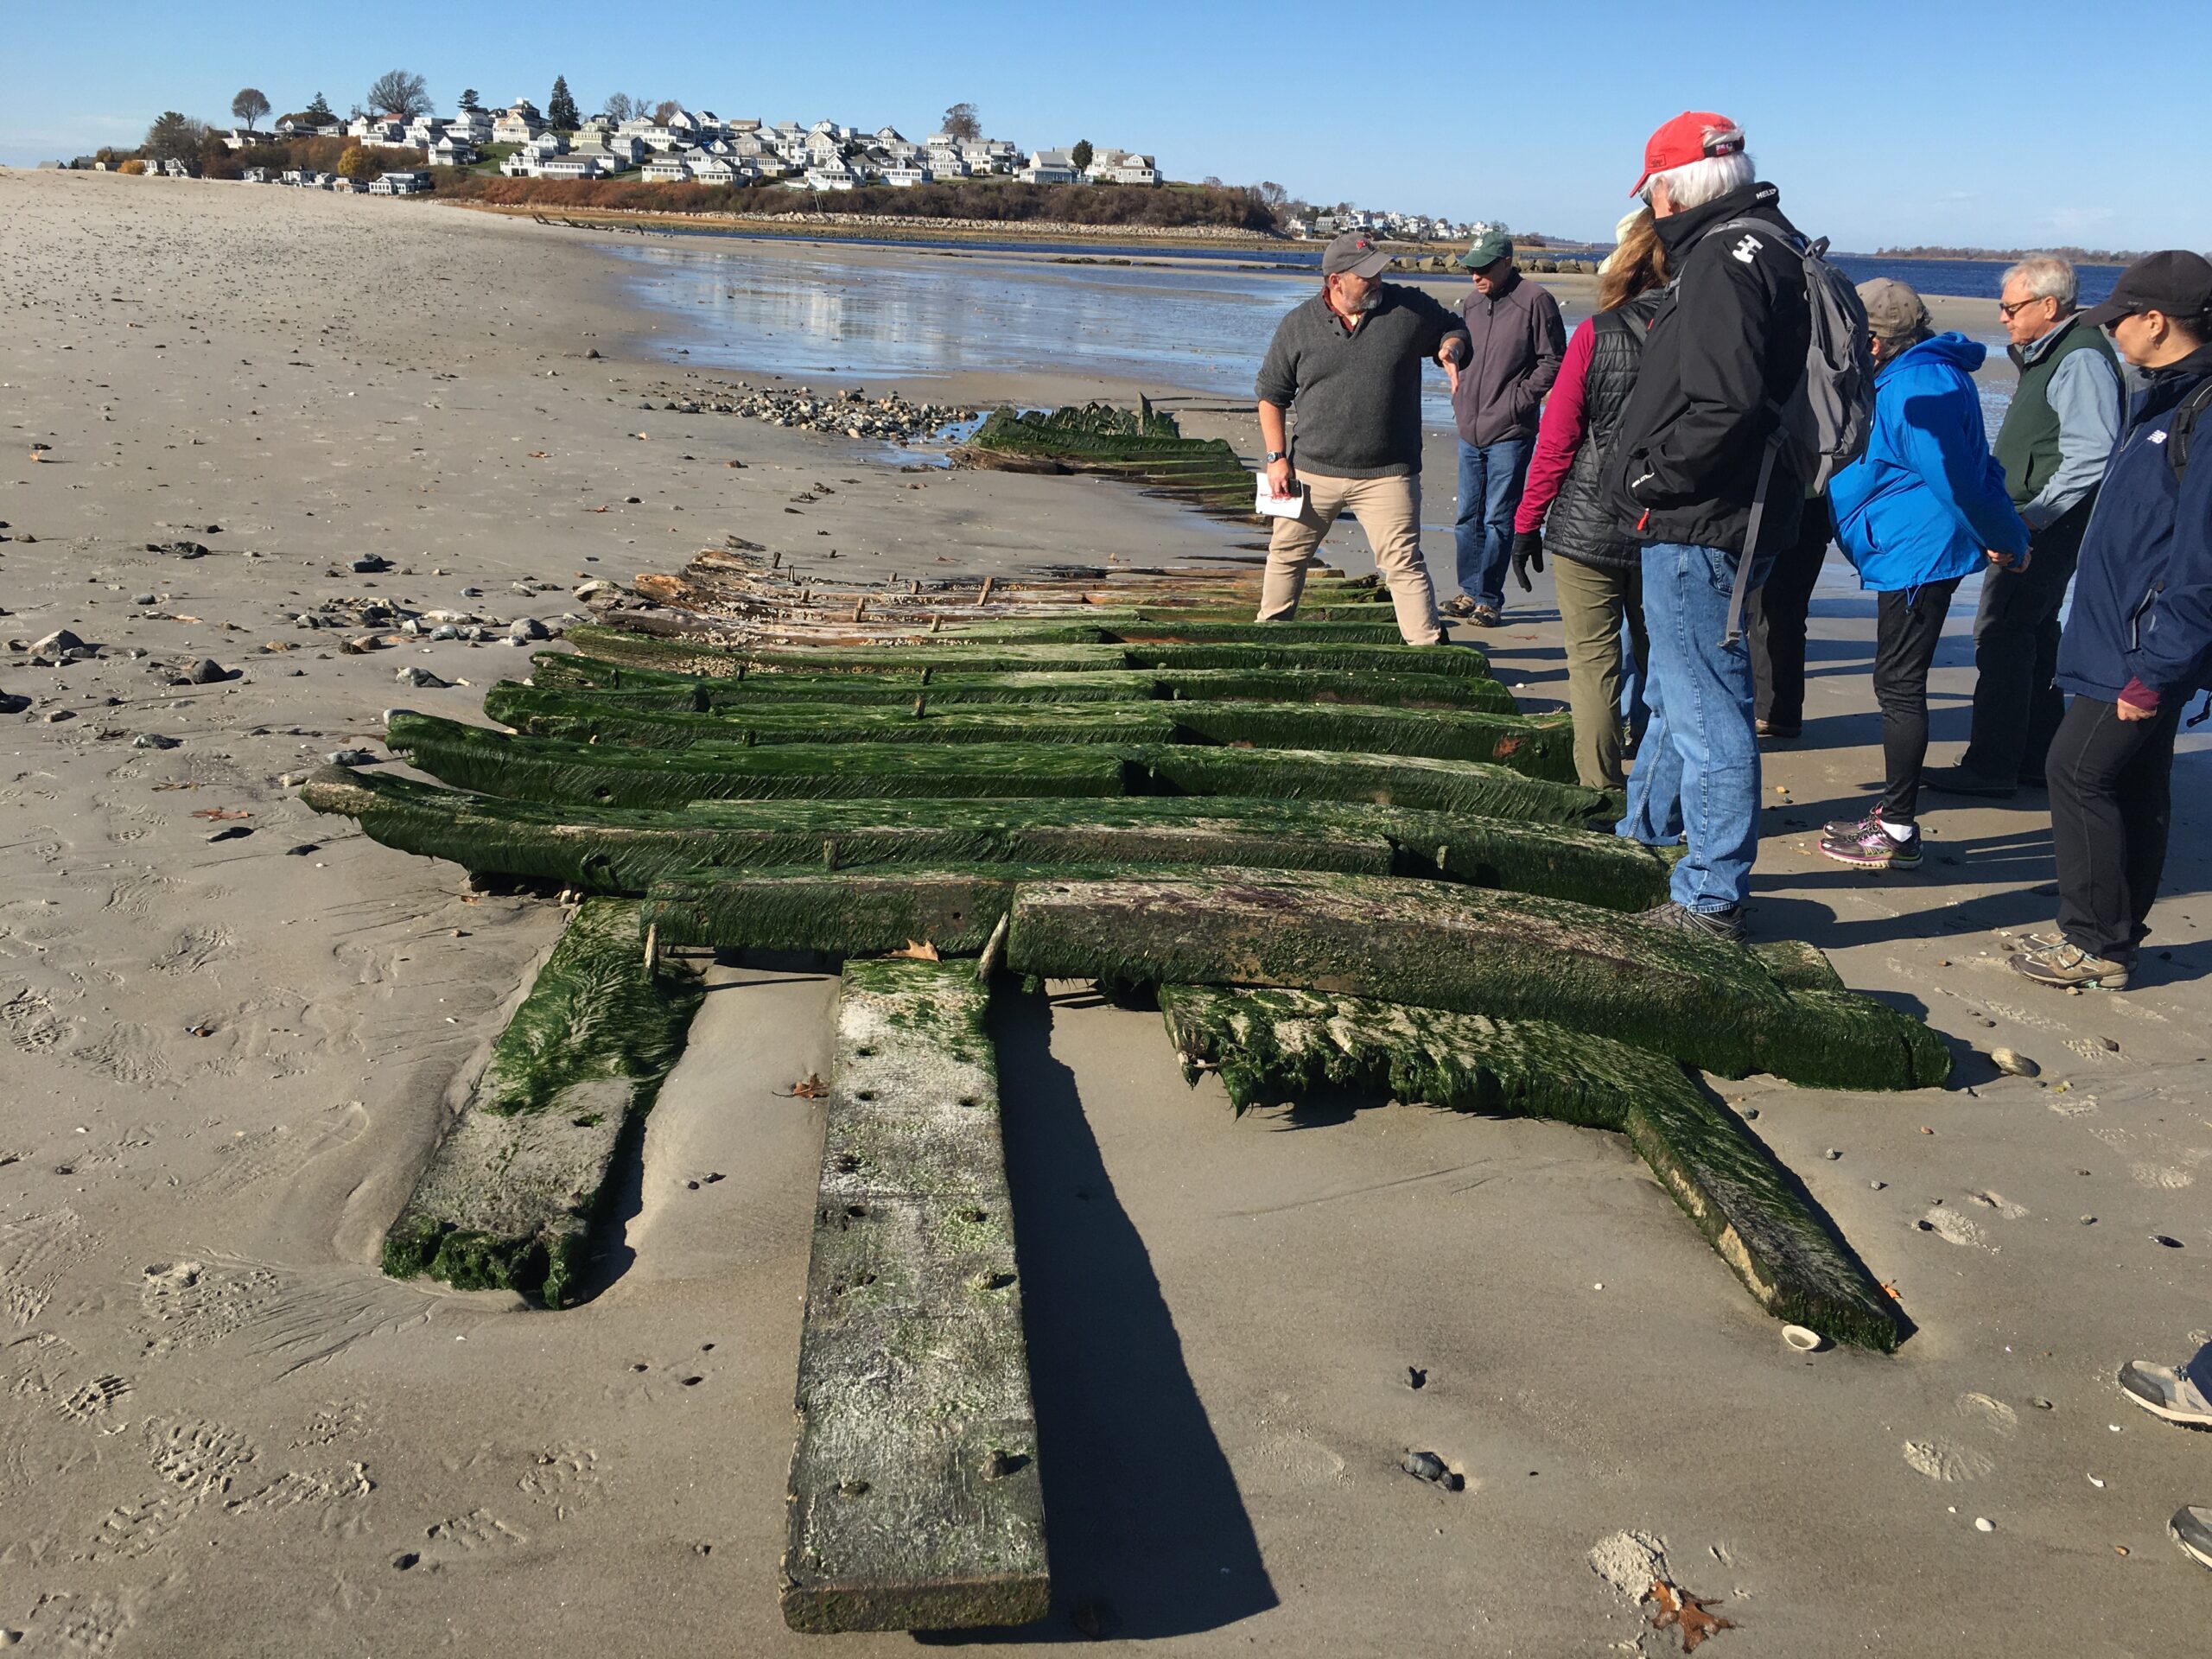 Several people look at a piece of Ada K. Damon, a shipwreck located on a sandy beach.